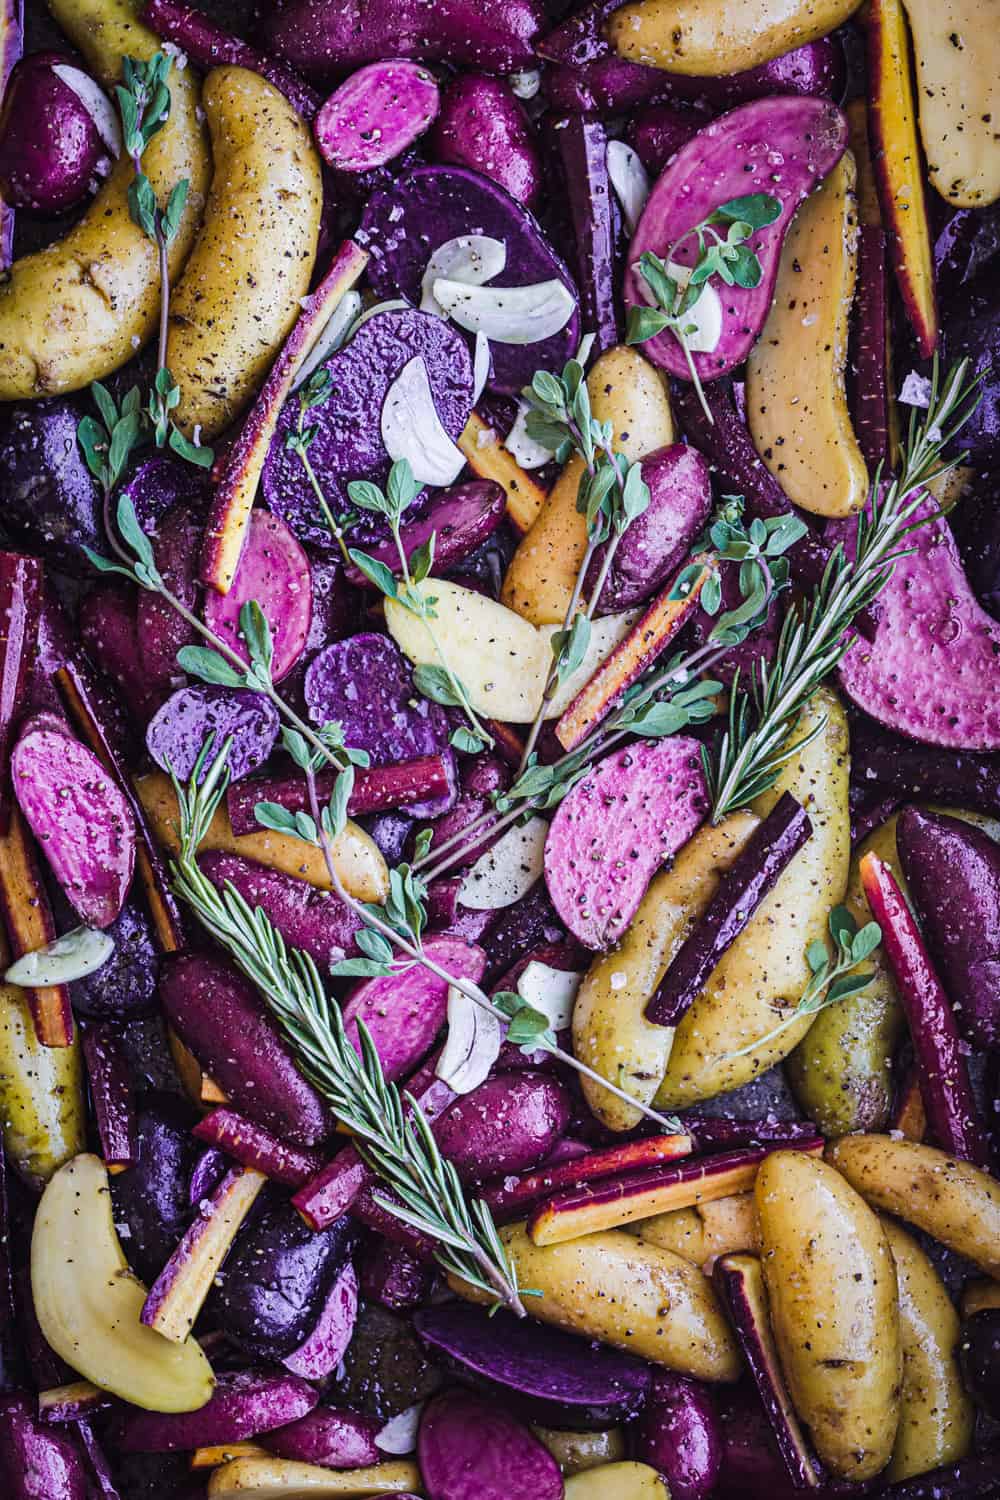 Purple, pink and white fingerling potatoes cut in half with olive oil, salt, pepper, rosemary, oregano, garlic and a few carrots, all mixed together on a sheet pan; overhead shot.